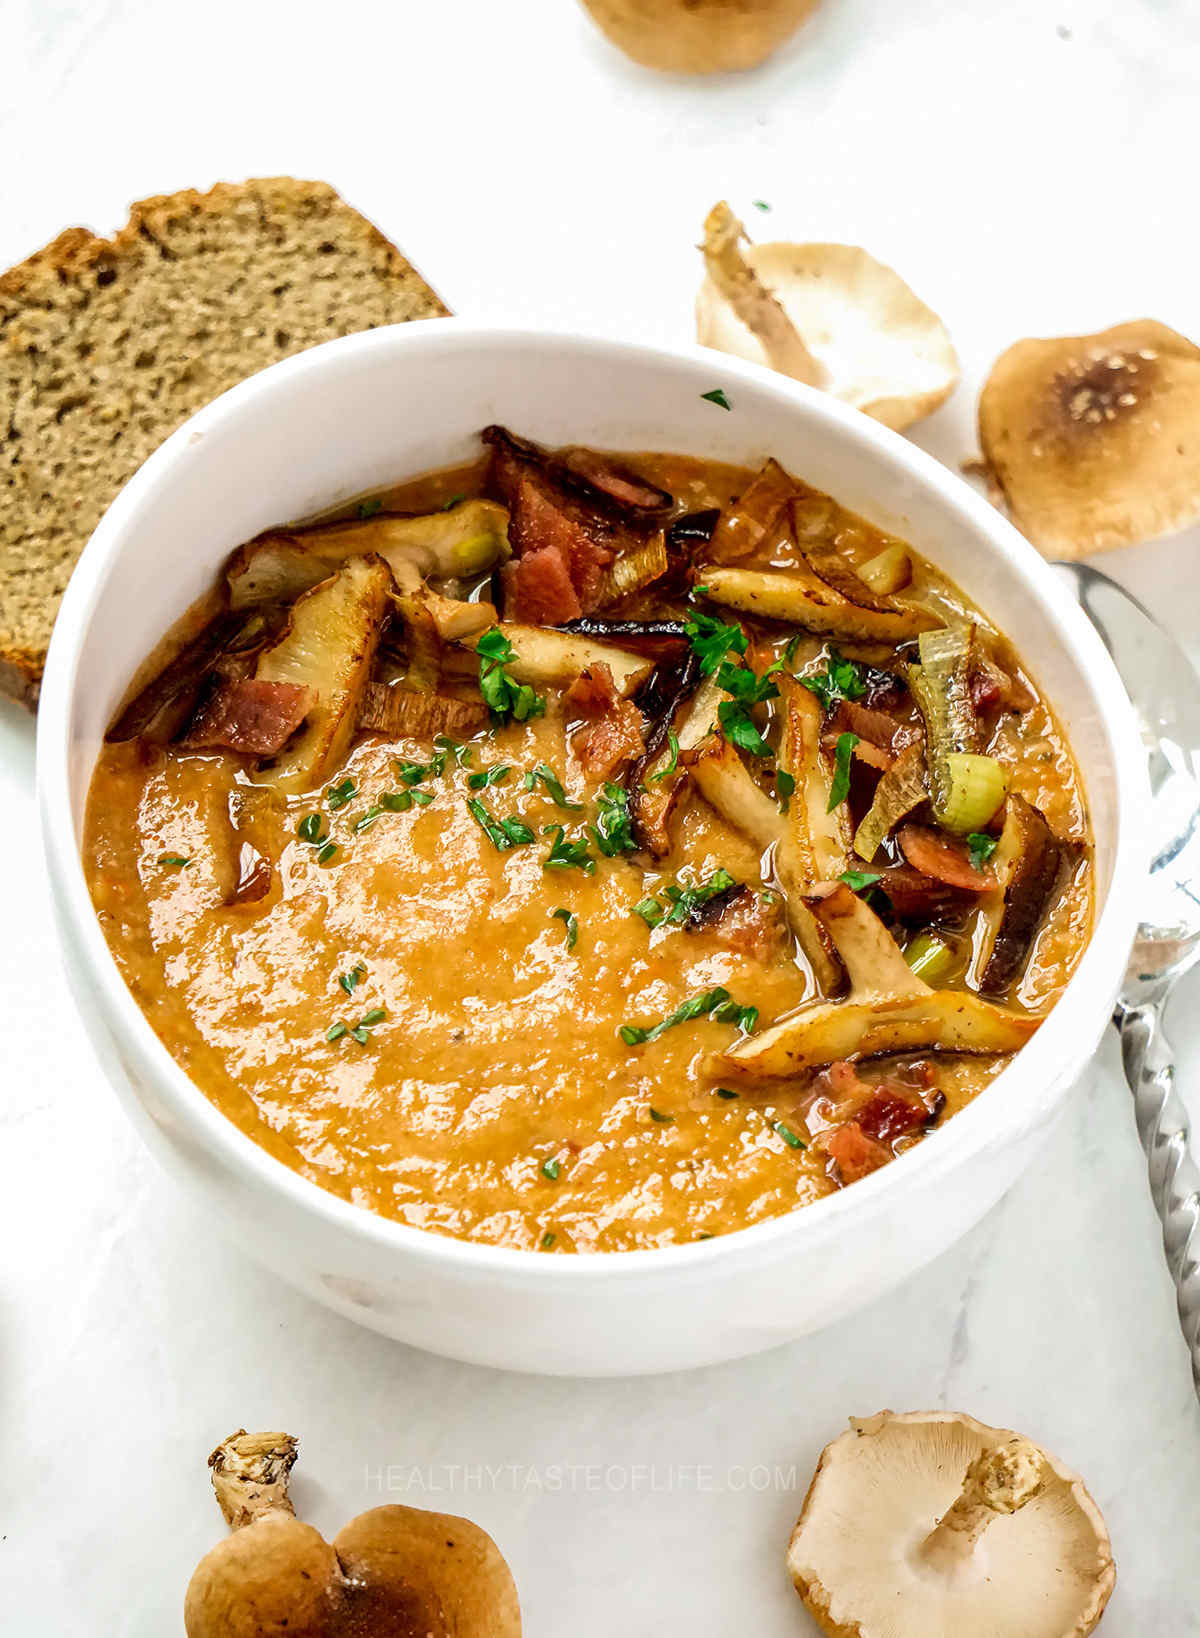 Healthy mushroom soup recipe, dairy free no cream required. This healthy mushroom soup is creamy, gluten free, dairy free and it's made with immune boosting shiitake mushrooms. 